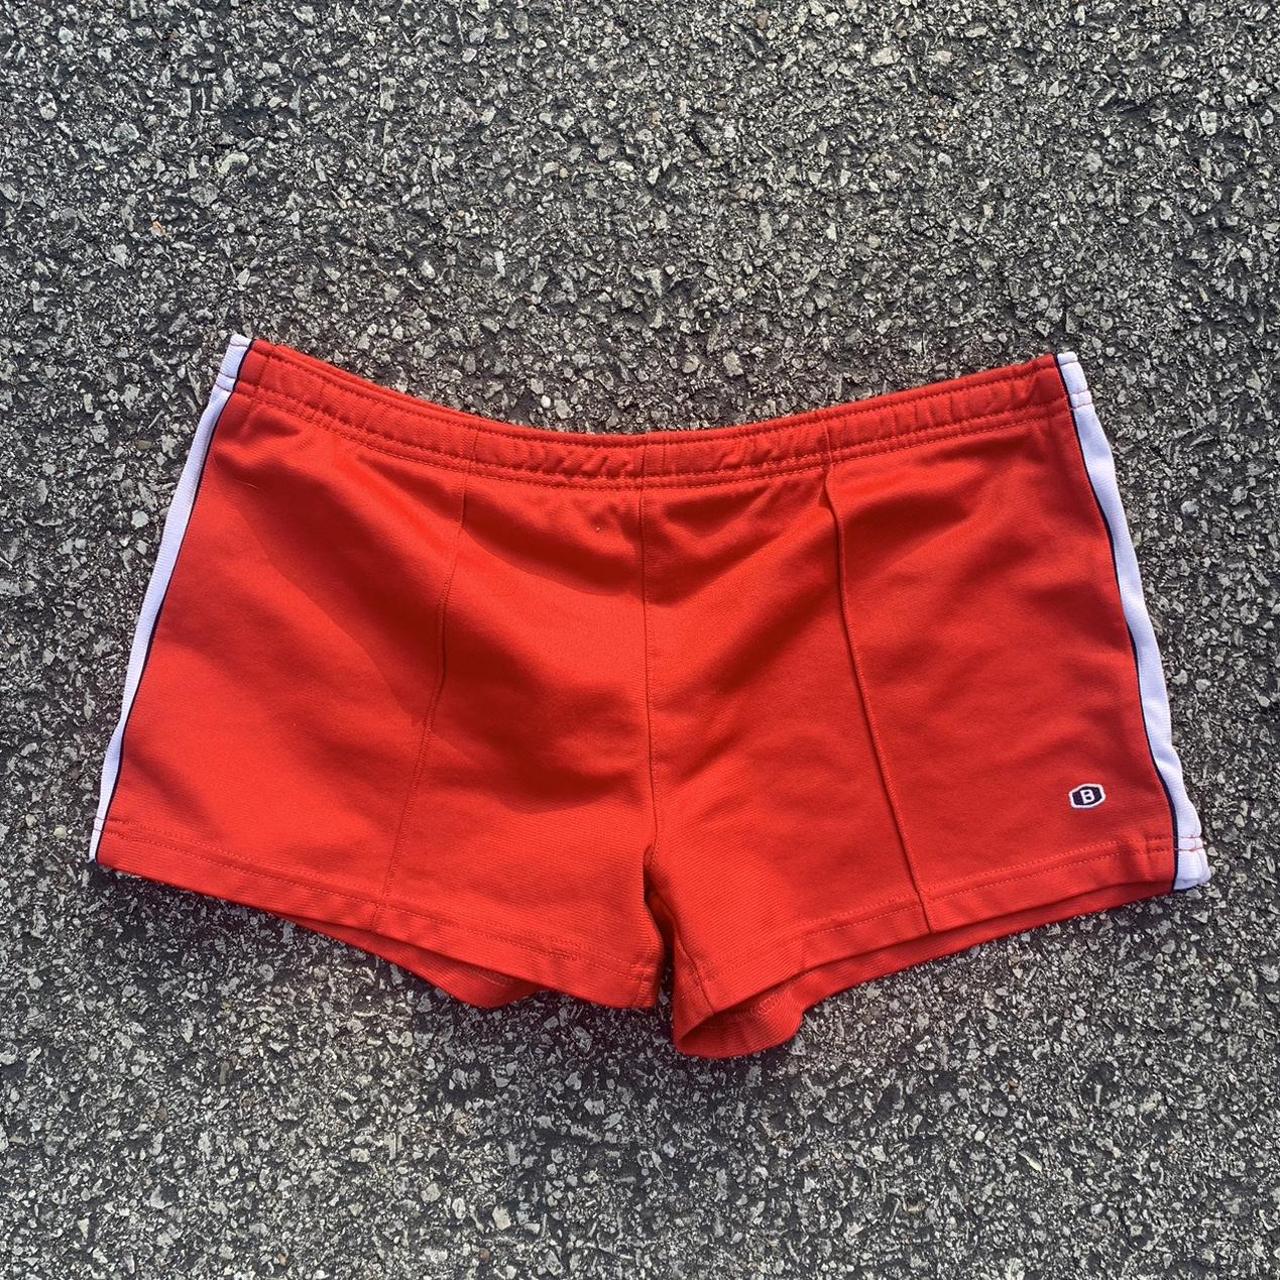 cutest little red short shorts 🏅 marked size small... - Depop